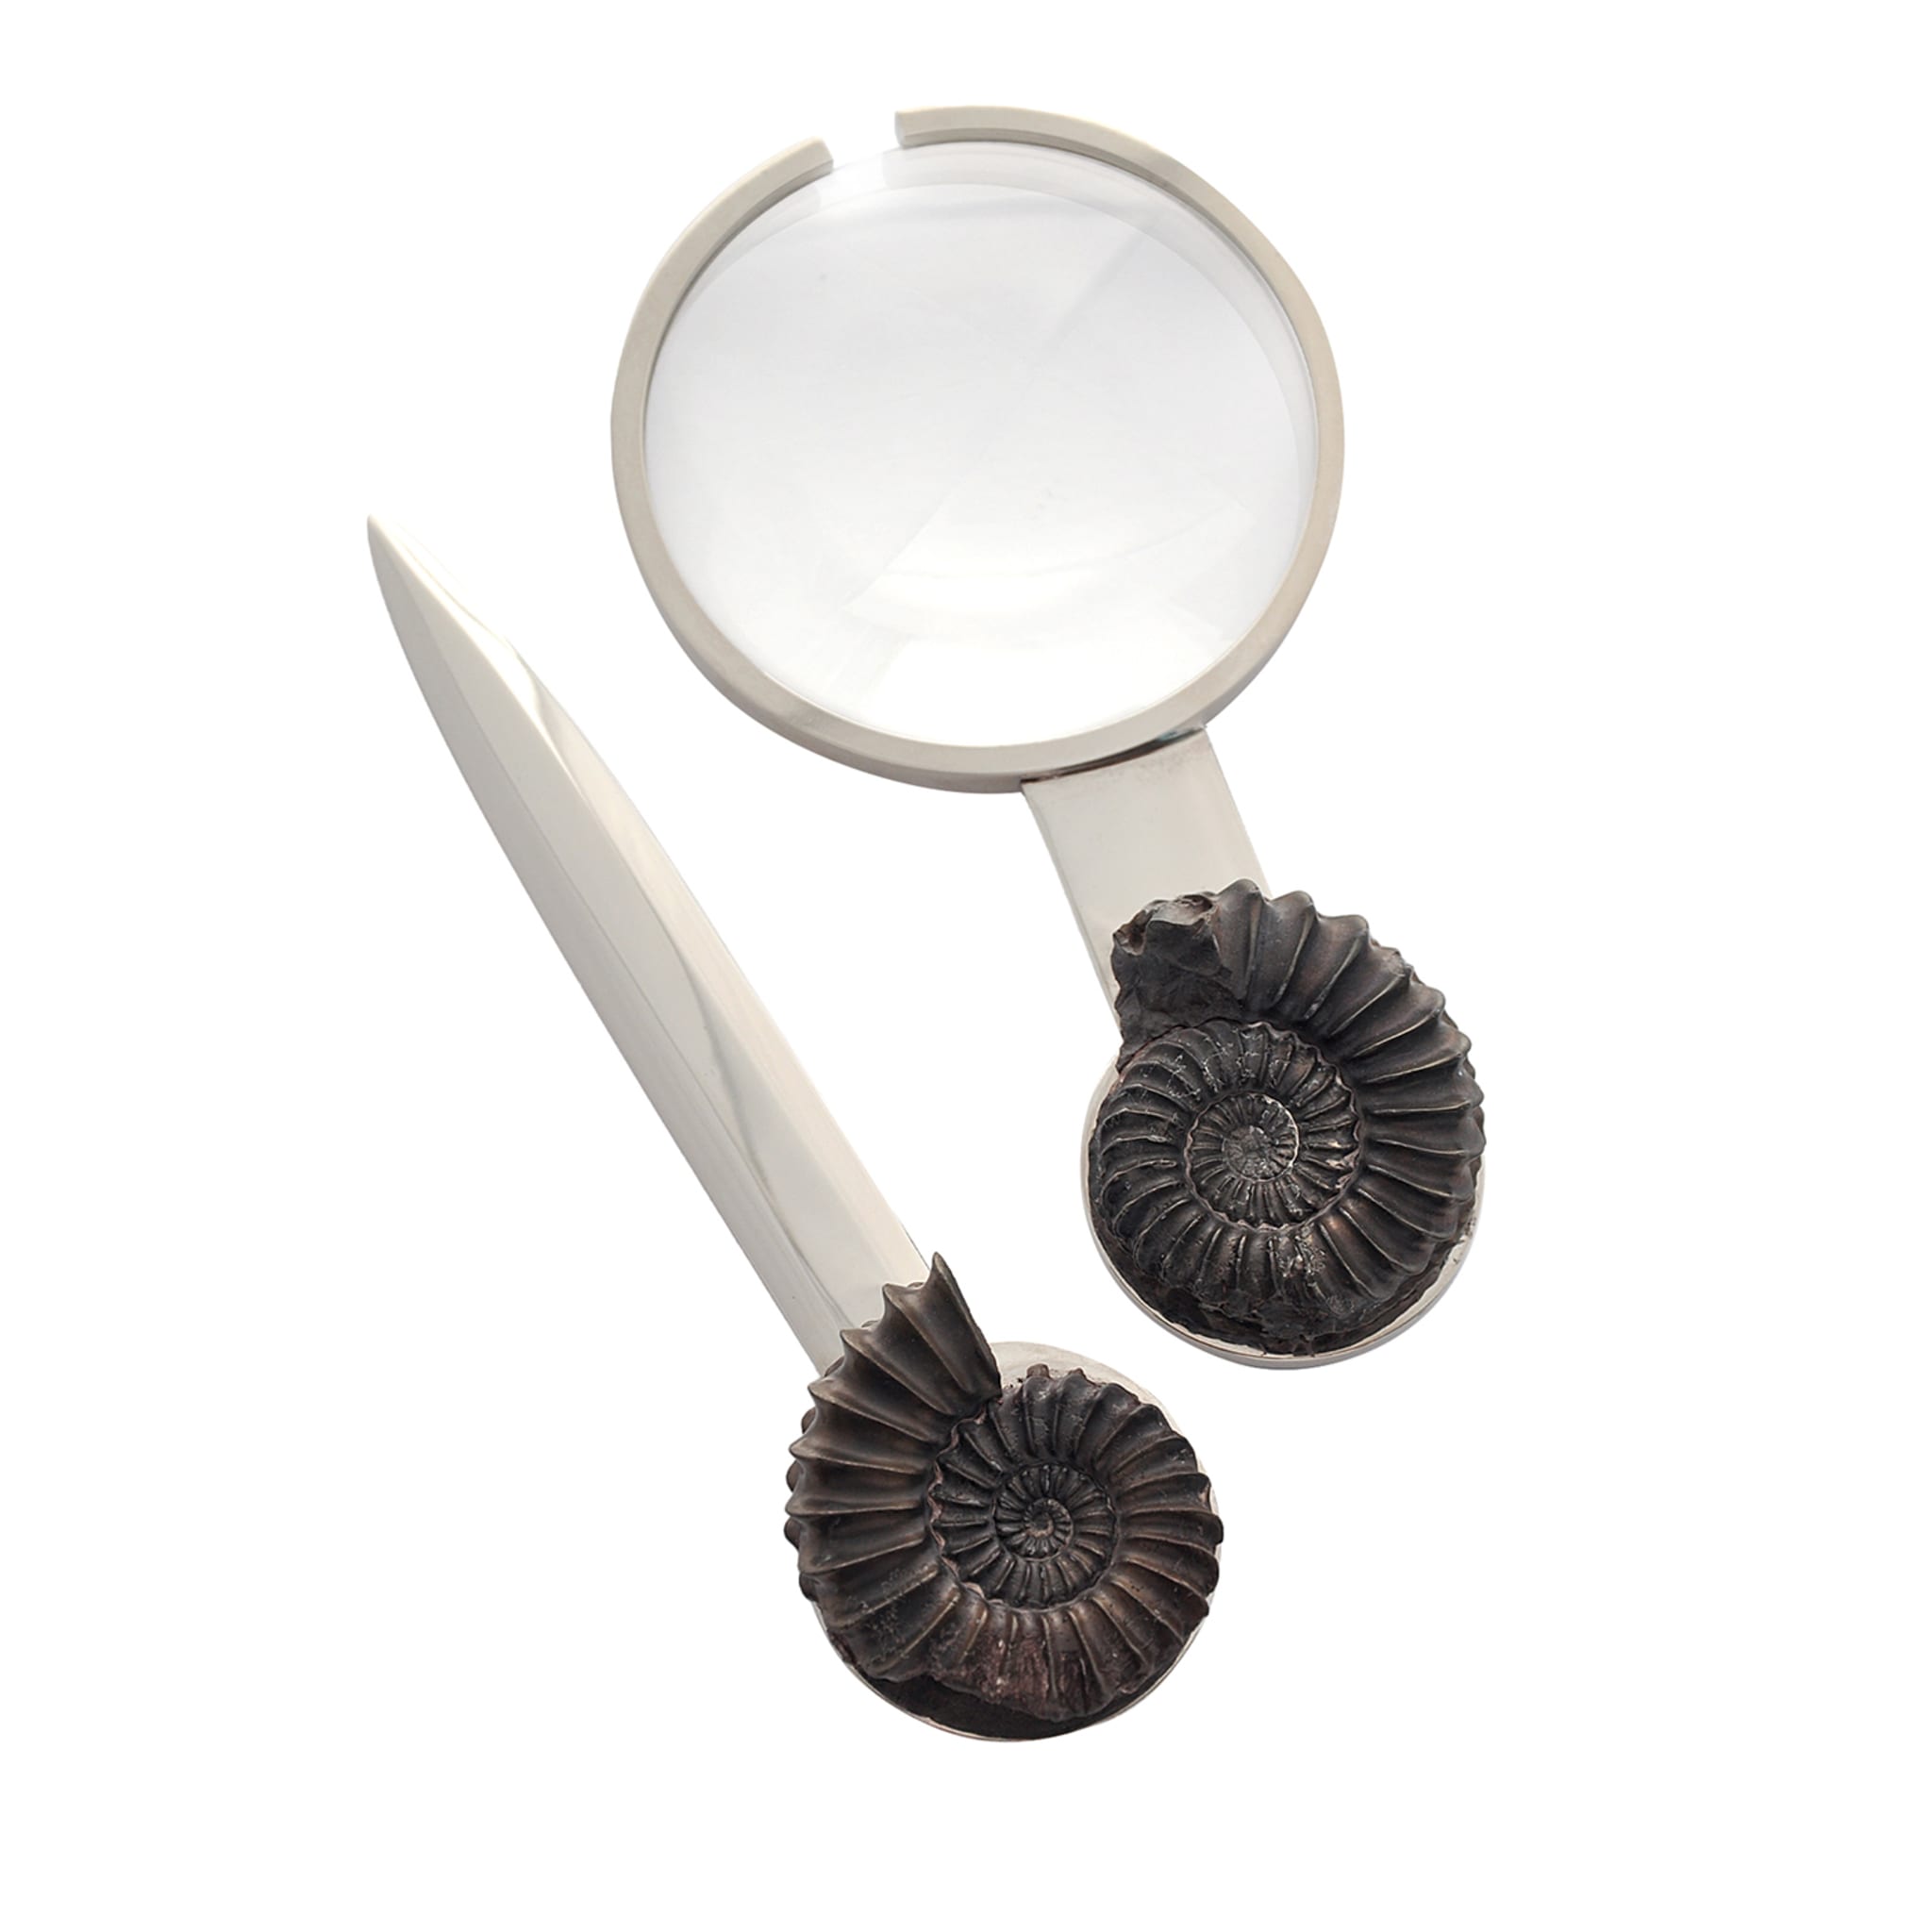 Pleuroceras Set of Magnifying Glass and Paper Knife by Nino Basso - Main view